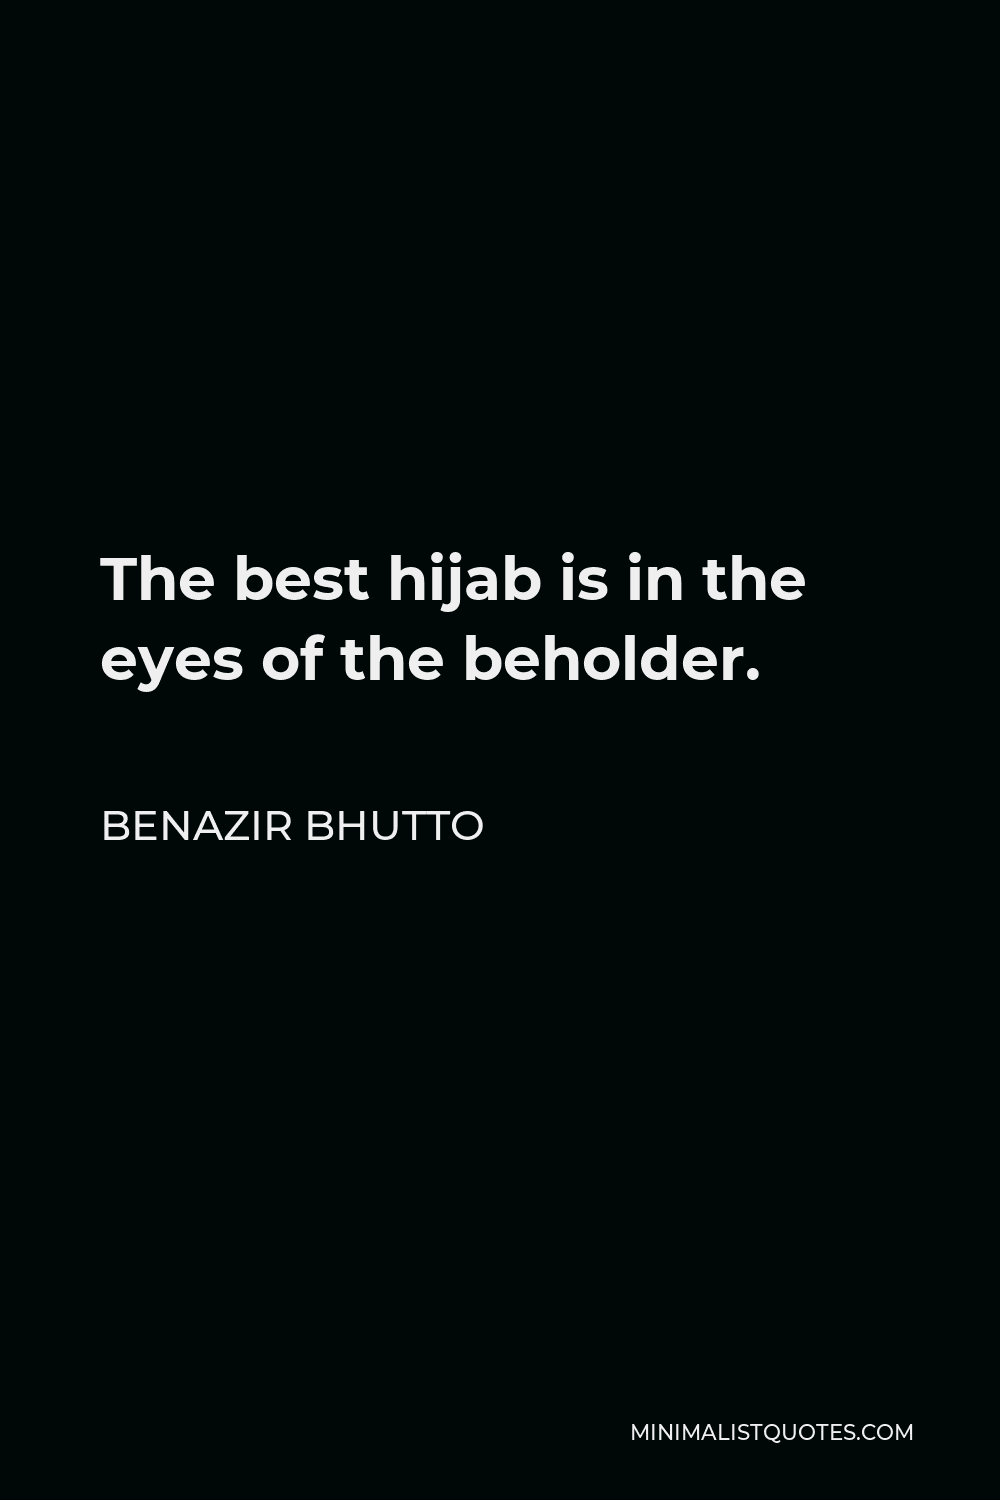 Benazir Bhutto Quote - The best hijab is in the eyes of the beholder.